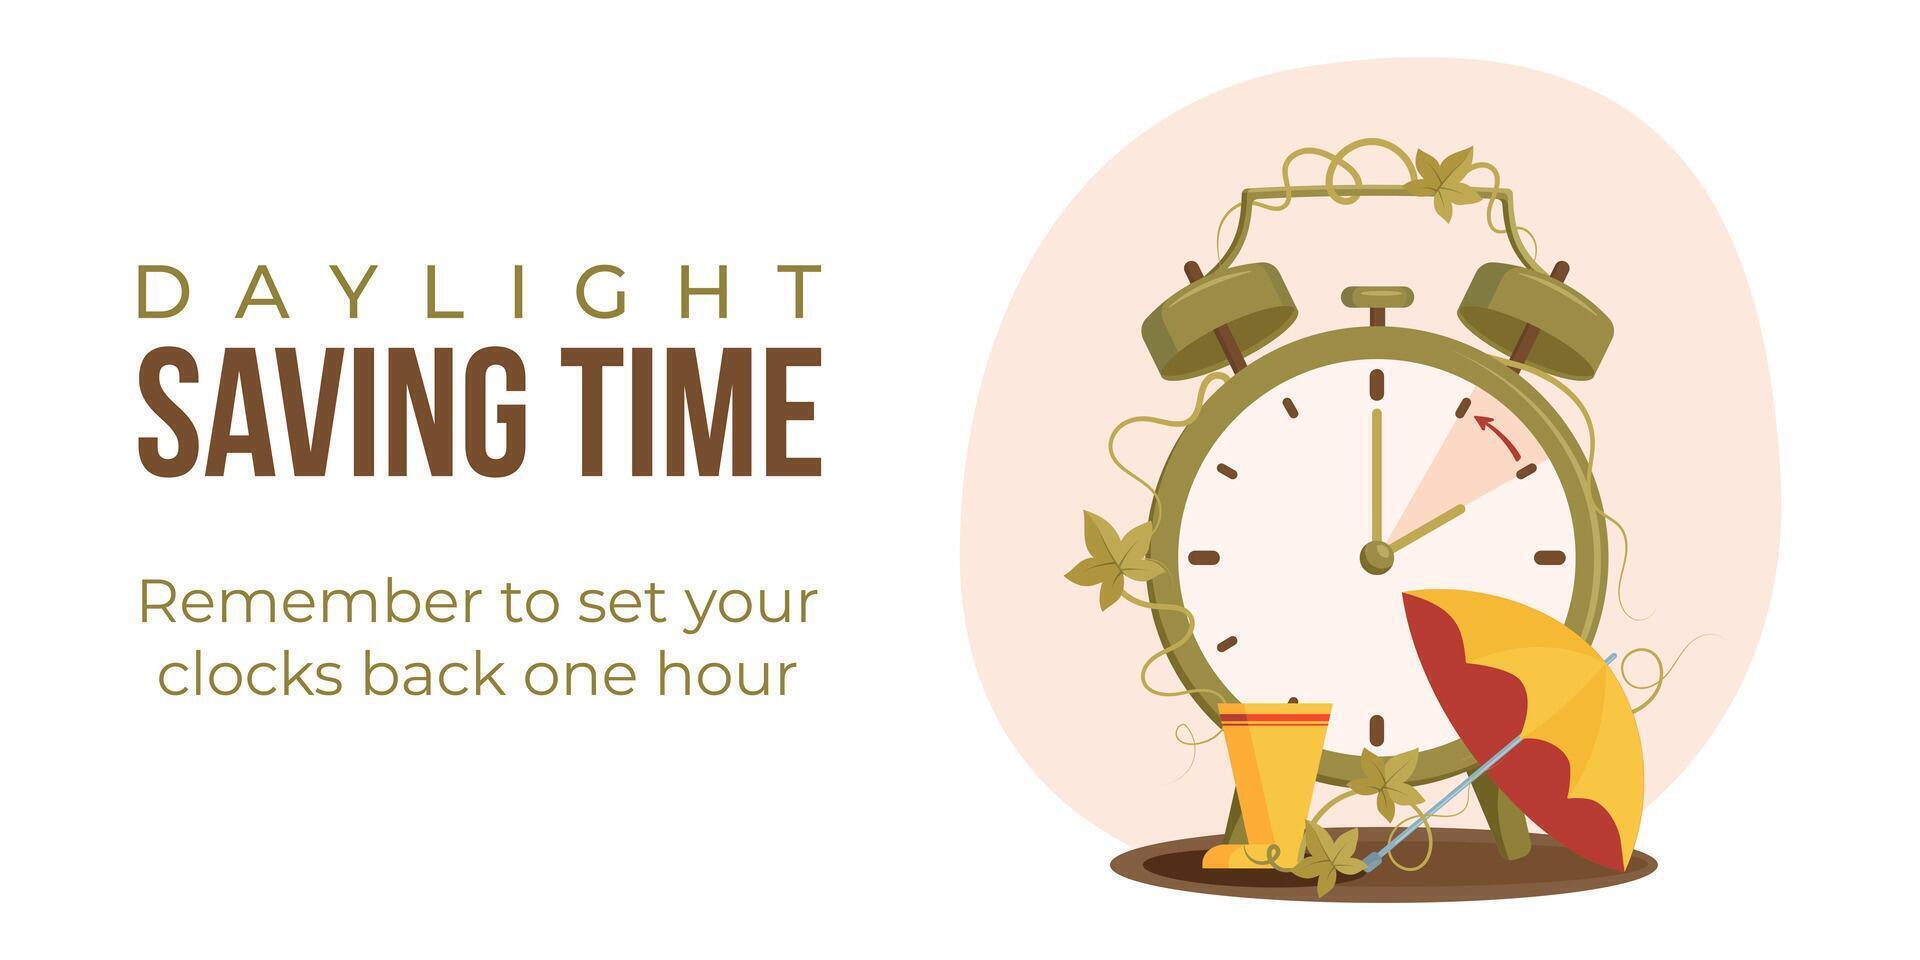 Daylight saving time end web banner, poster. Minimalist alarm clock with umbrella and rubber rain boots, clock hand turning back to winter time. Fall back concept vector illustration.